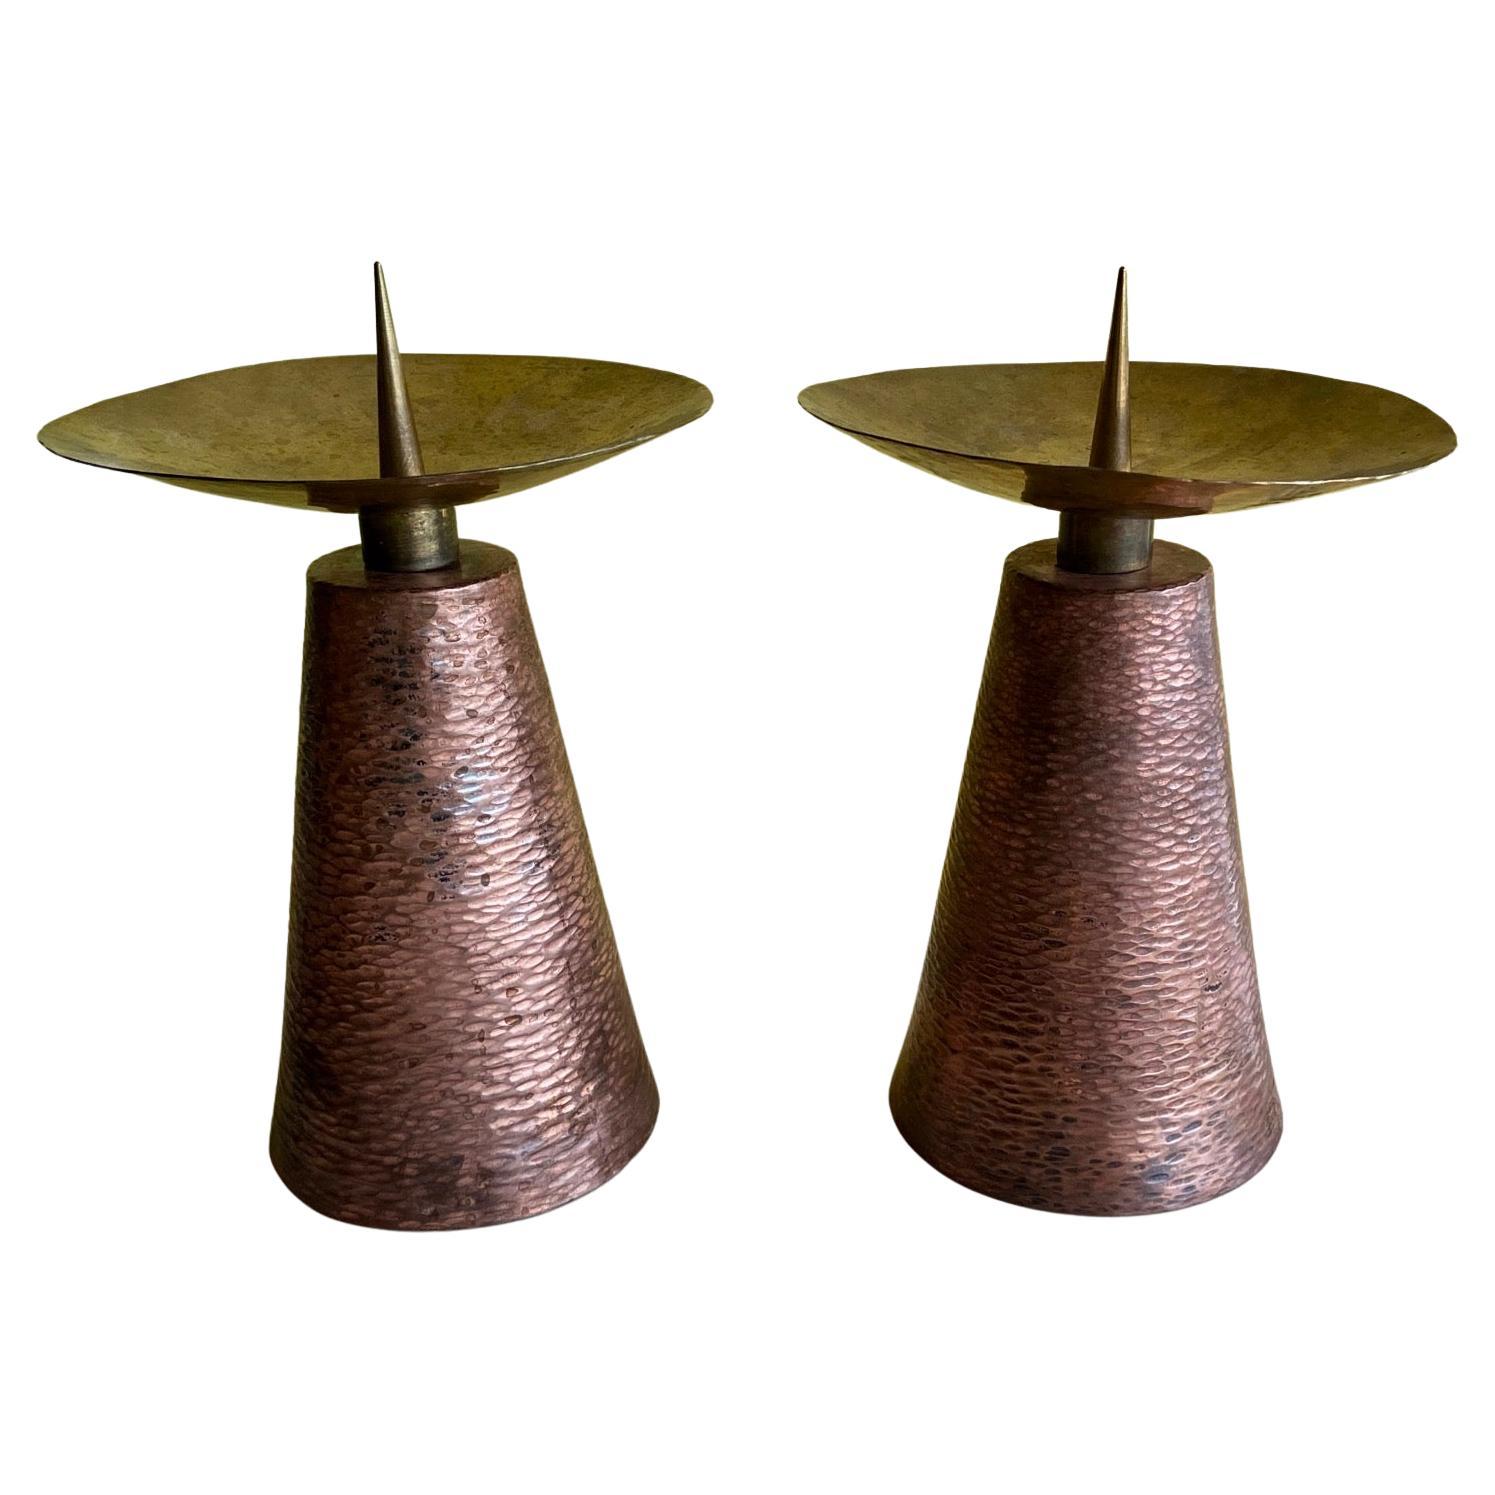 Large Pair of Arts and Crafts hammered Copper and Brass Candlesticks